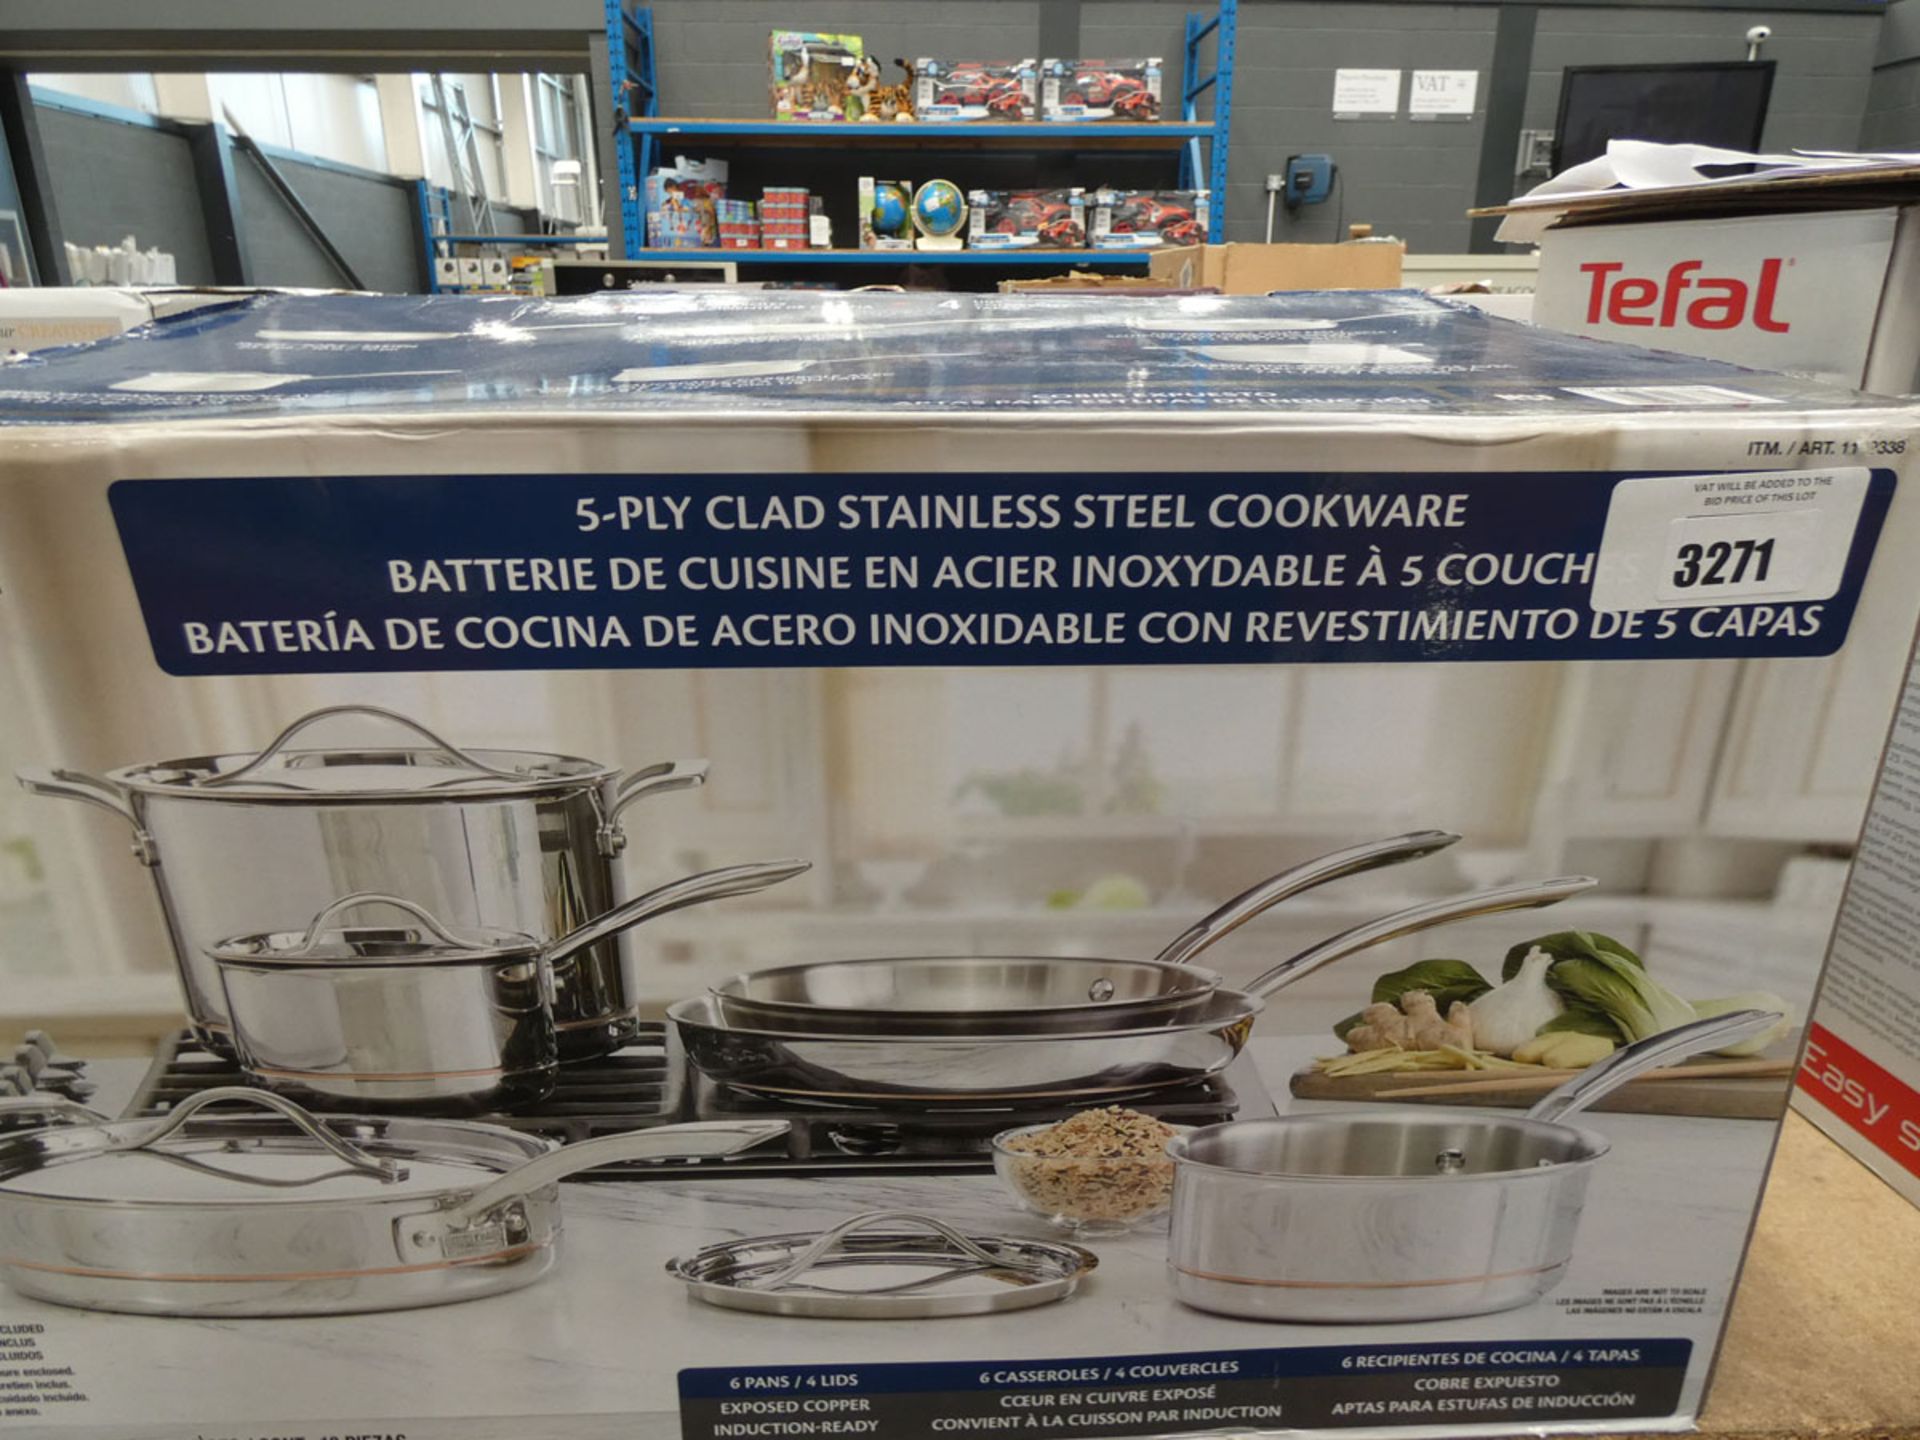 Boxed Kirkland Clad stainless steel cookware set